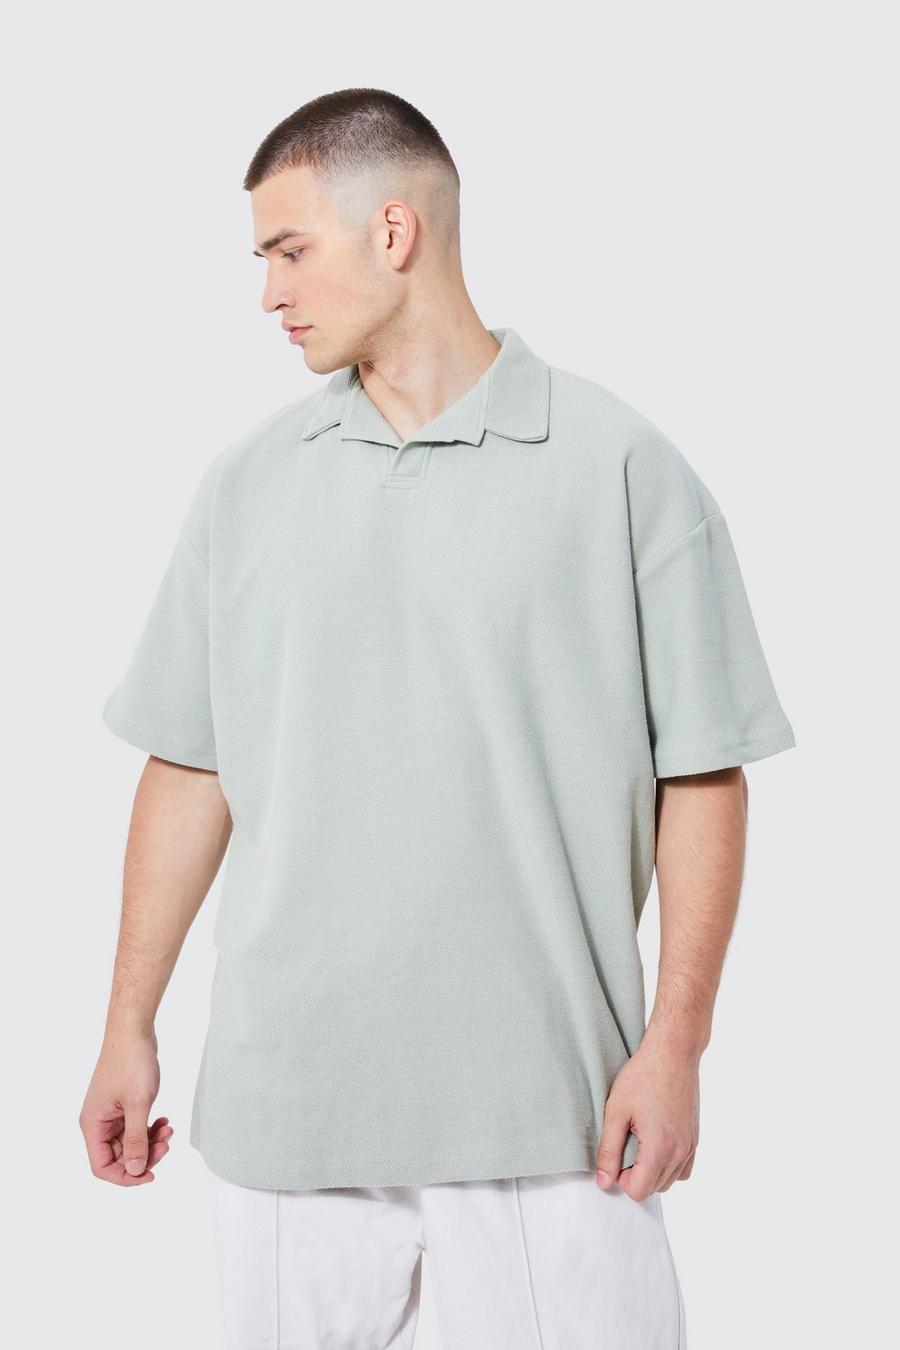 Sage Tall Oversized Jersey Keperstof Polo Met Revers Kraag